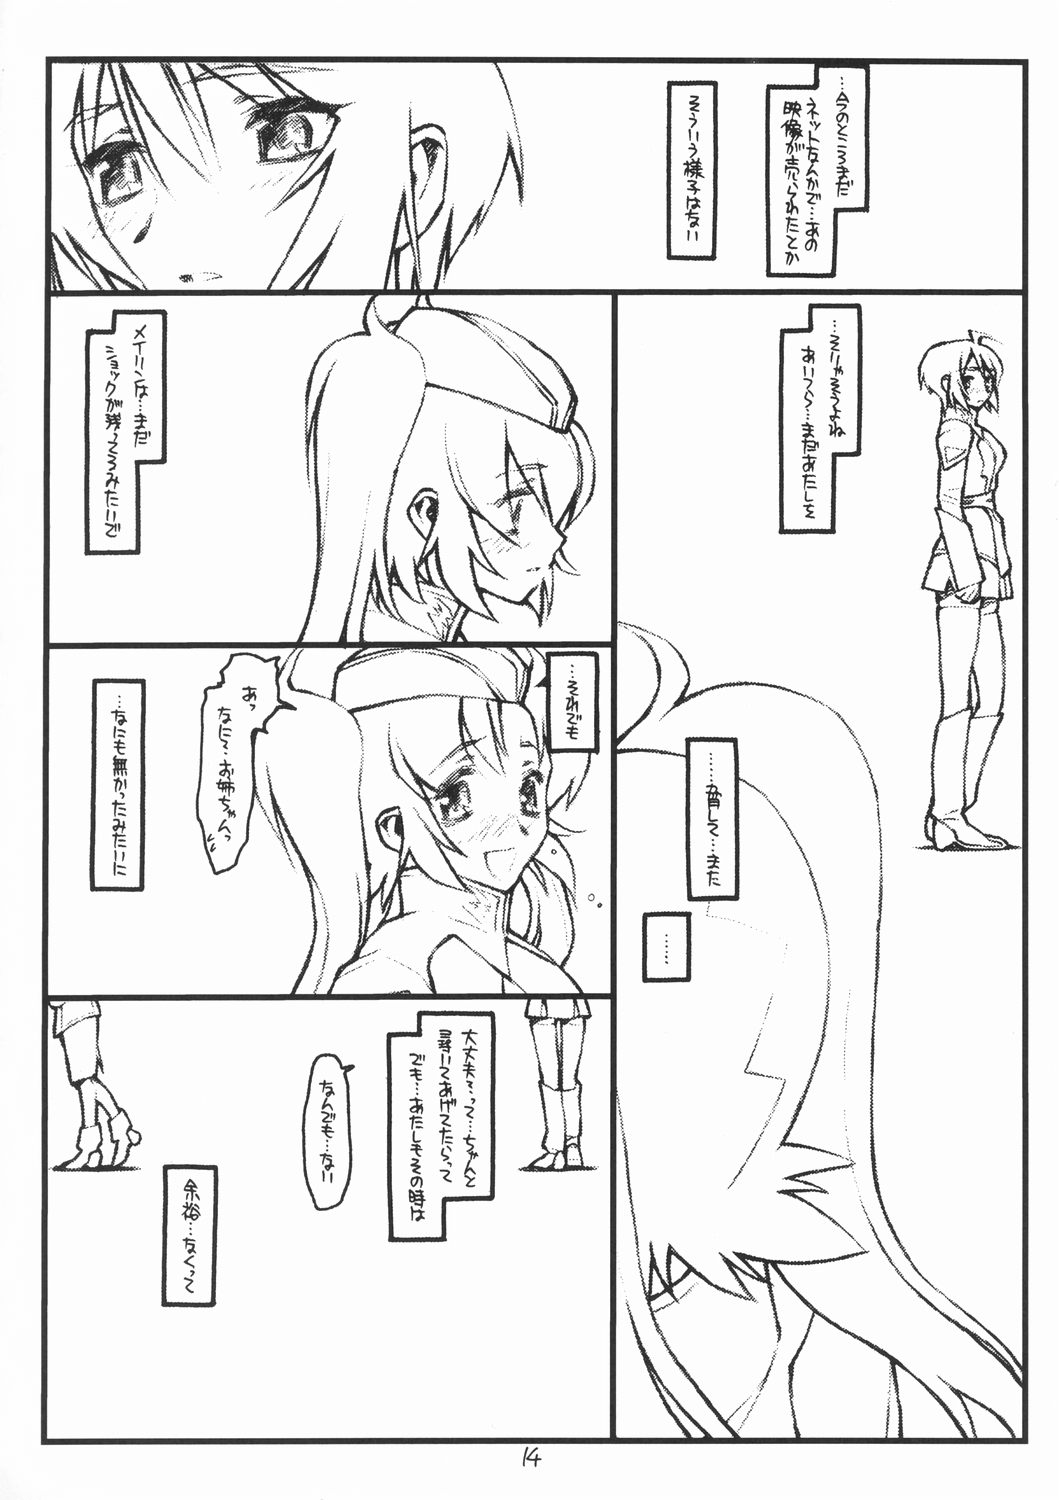 (SC28) [bolze. (rit.)] Miscoordination. (Mobile Suit Gundam SEED DESTINY) page 13 full